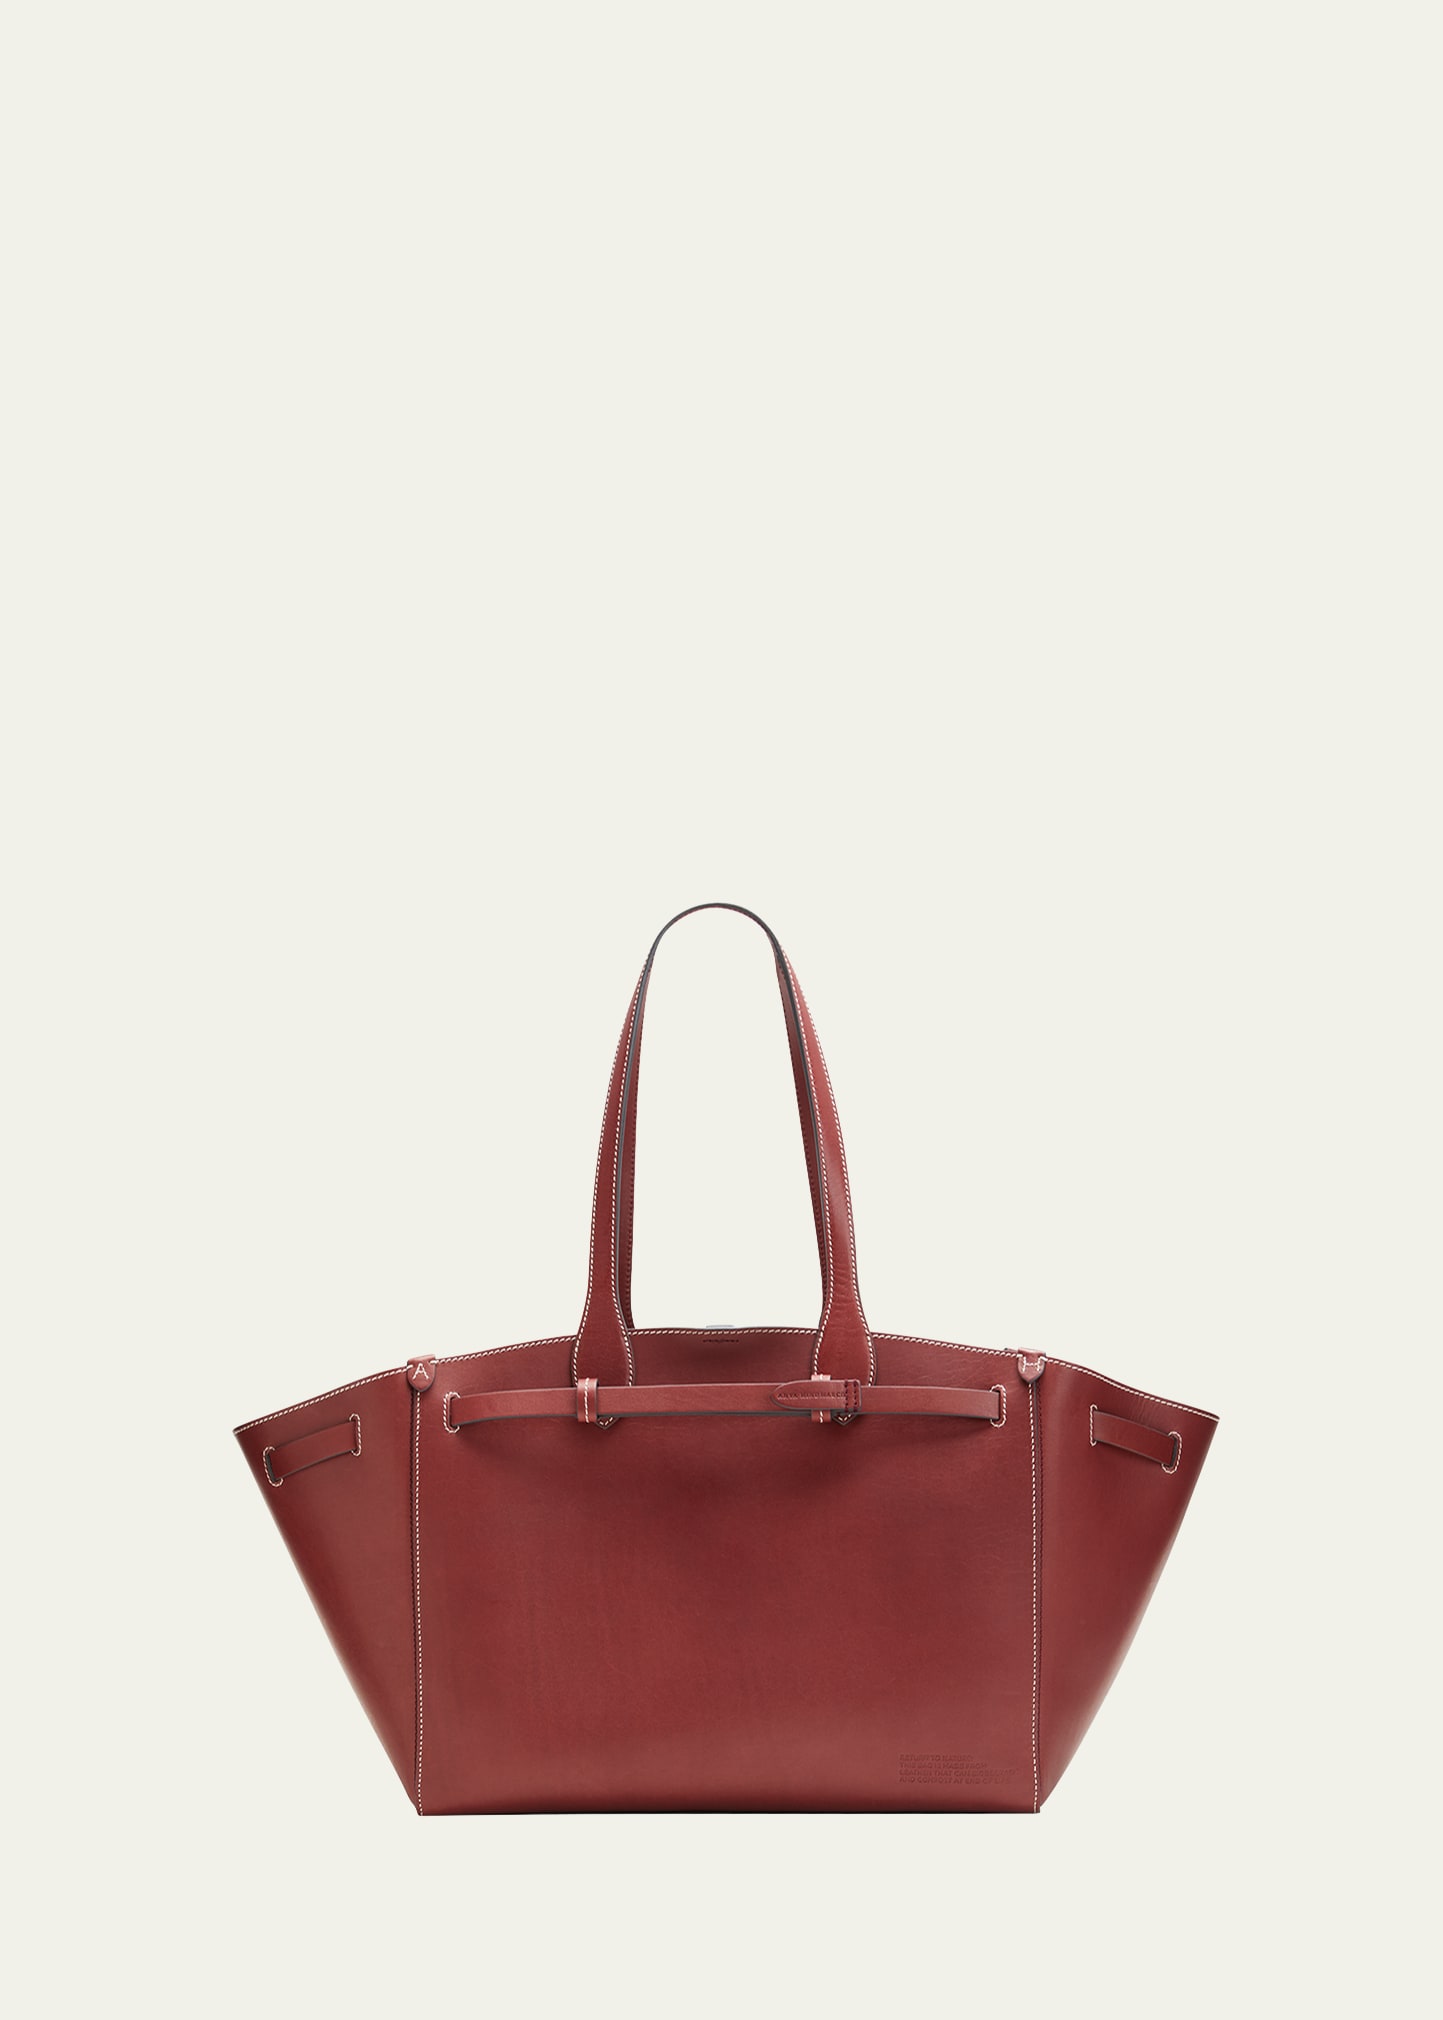 Anya Hindmarch Compostable Leather Tote Bag In Rosewood